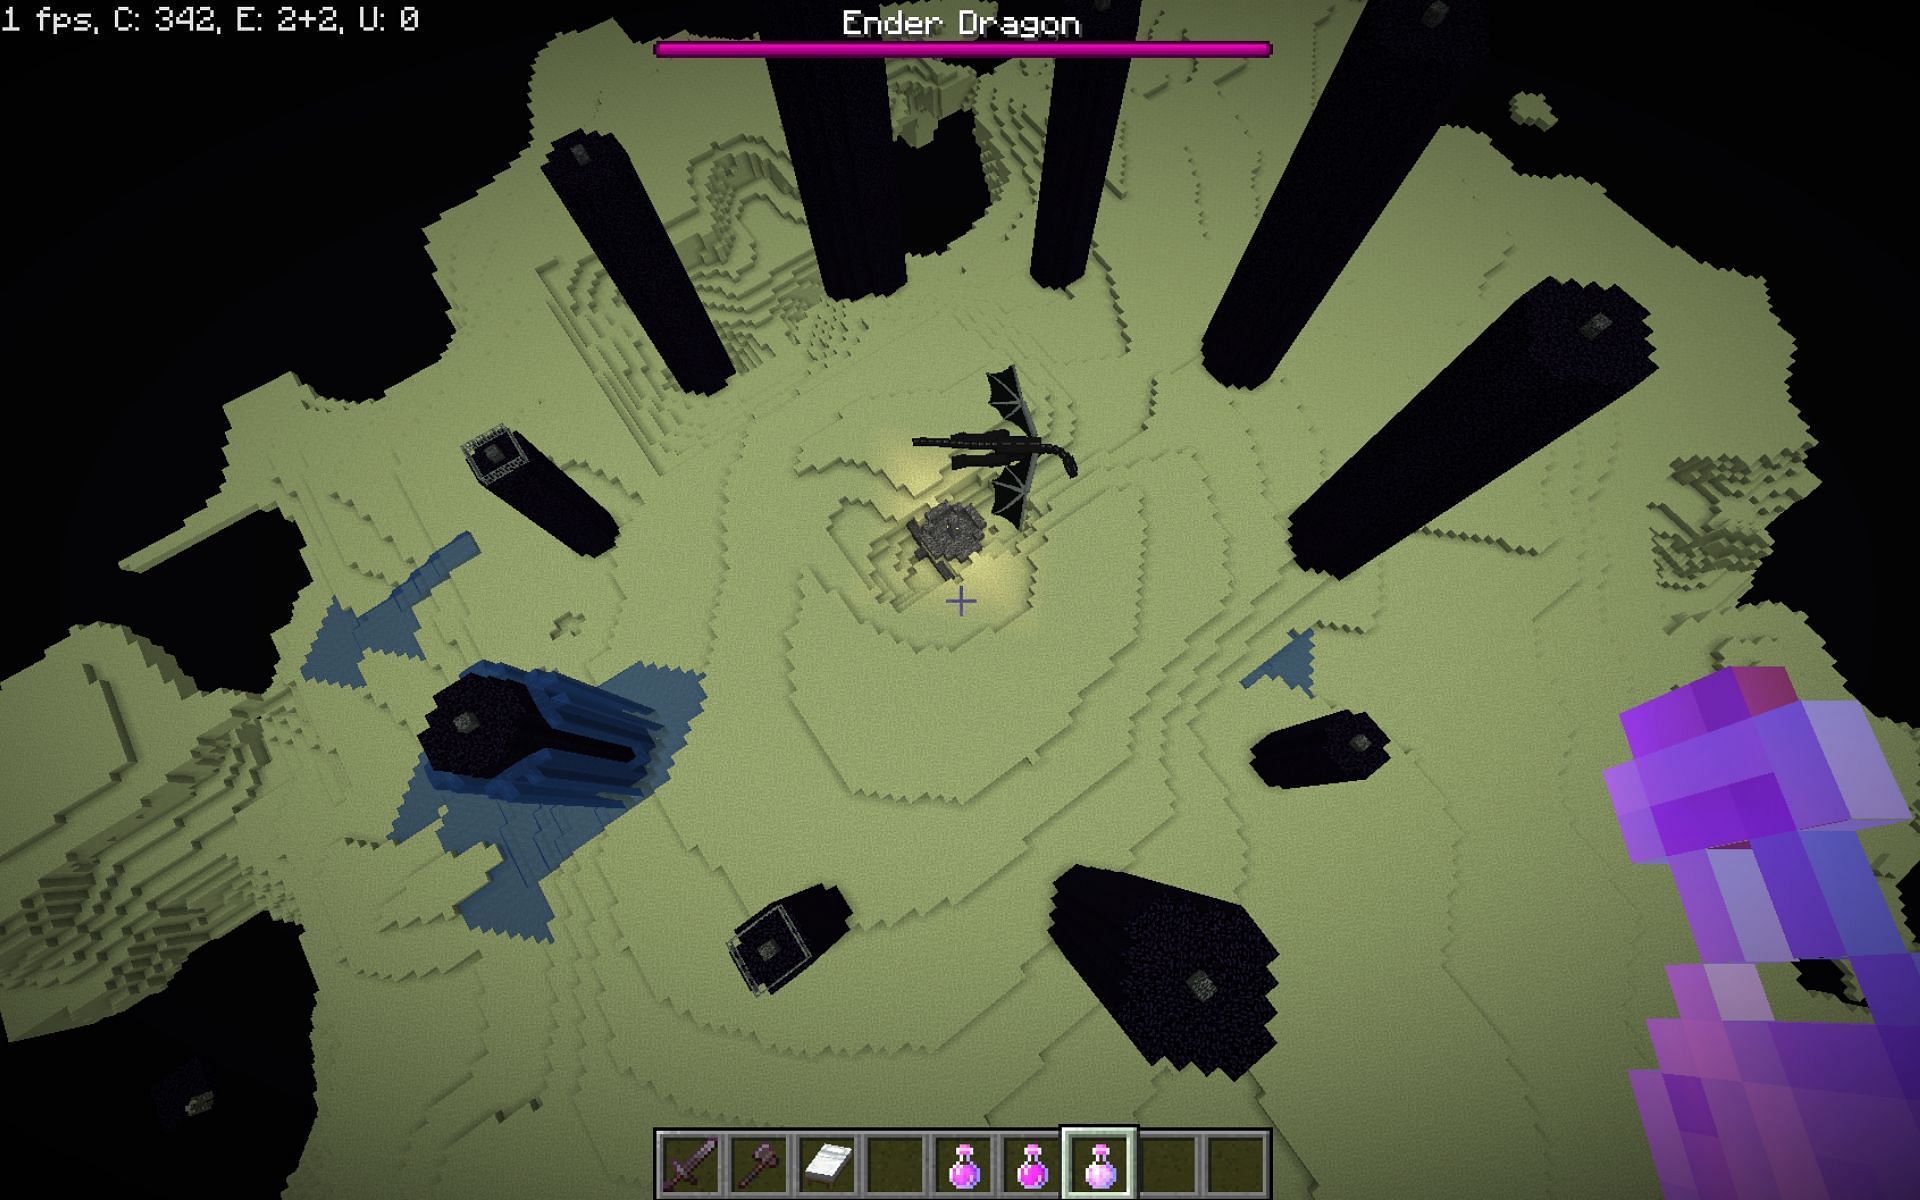 Ender Dragon battle in the End realm (Image via Minecraft)